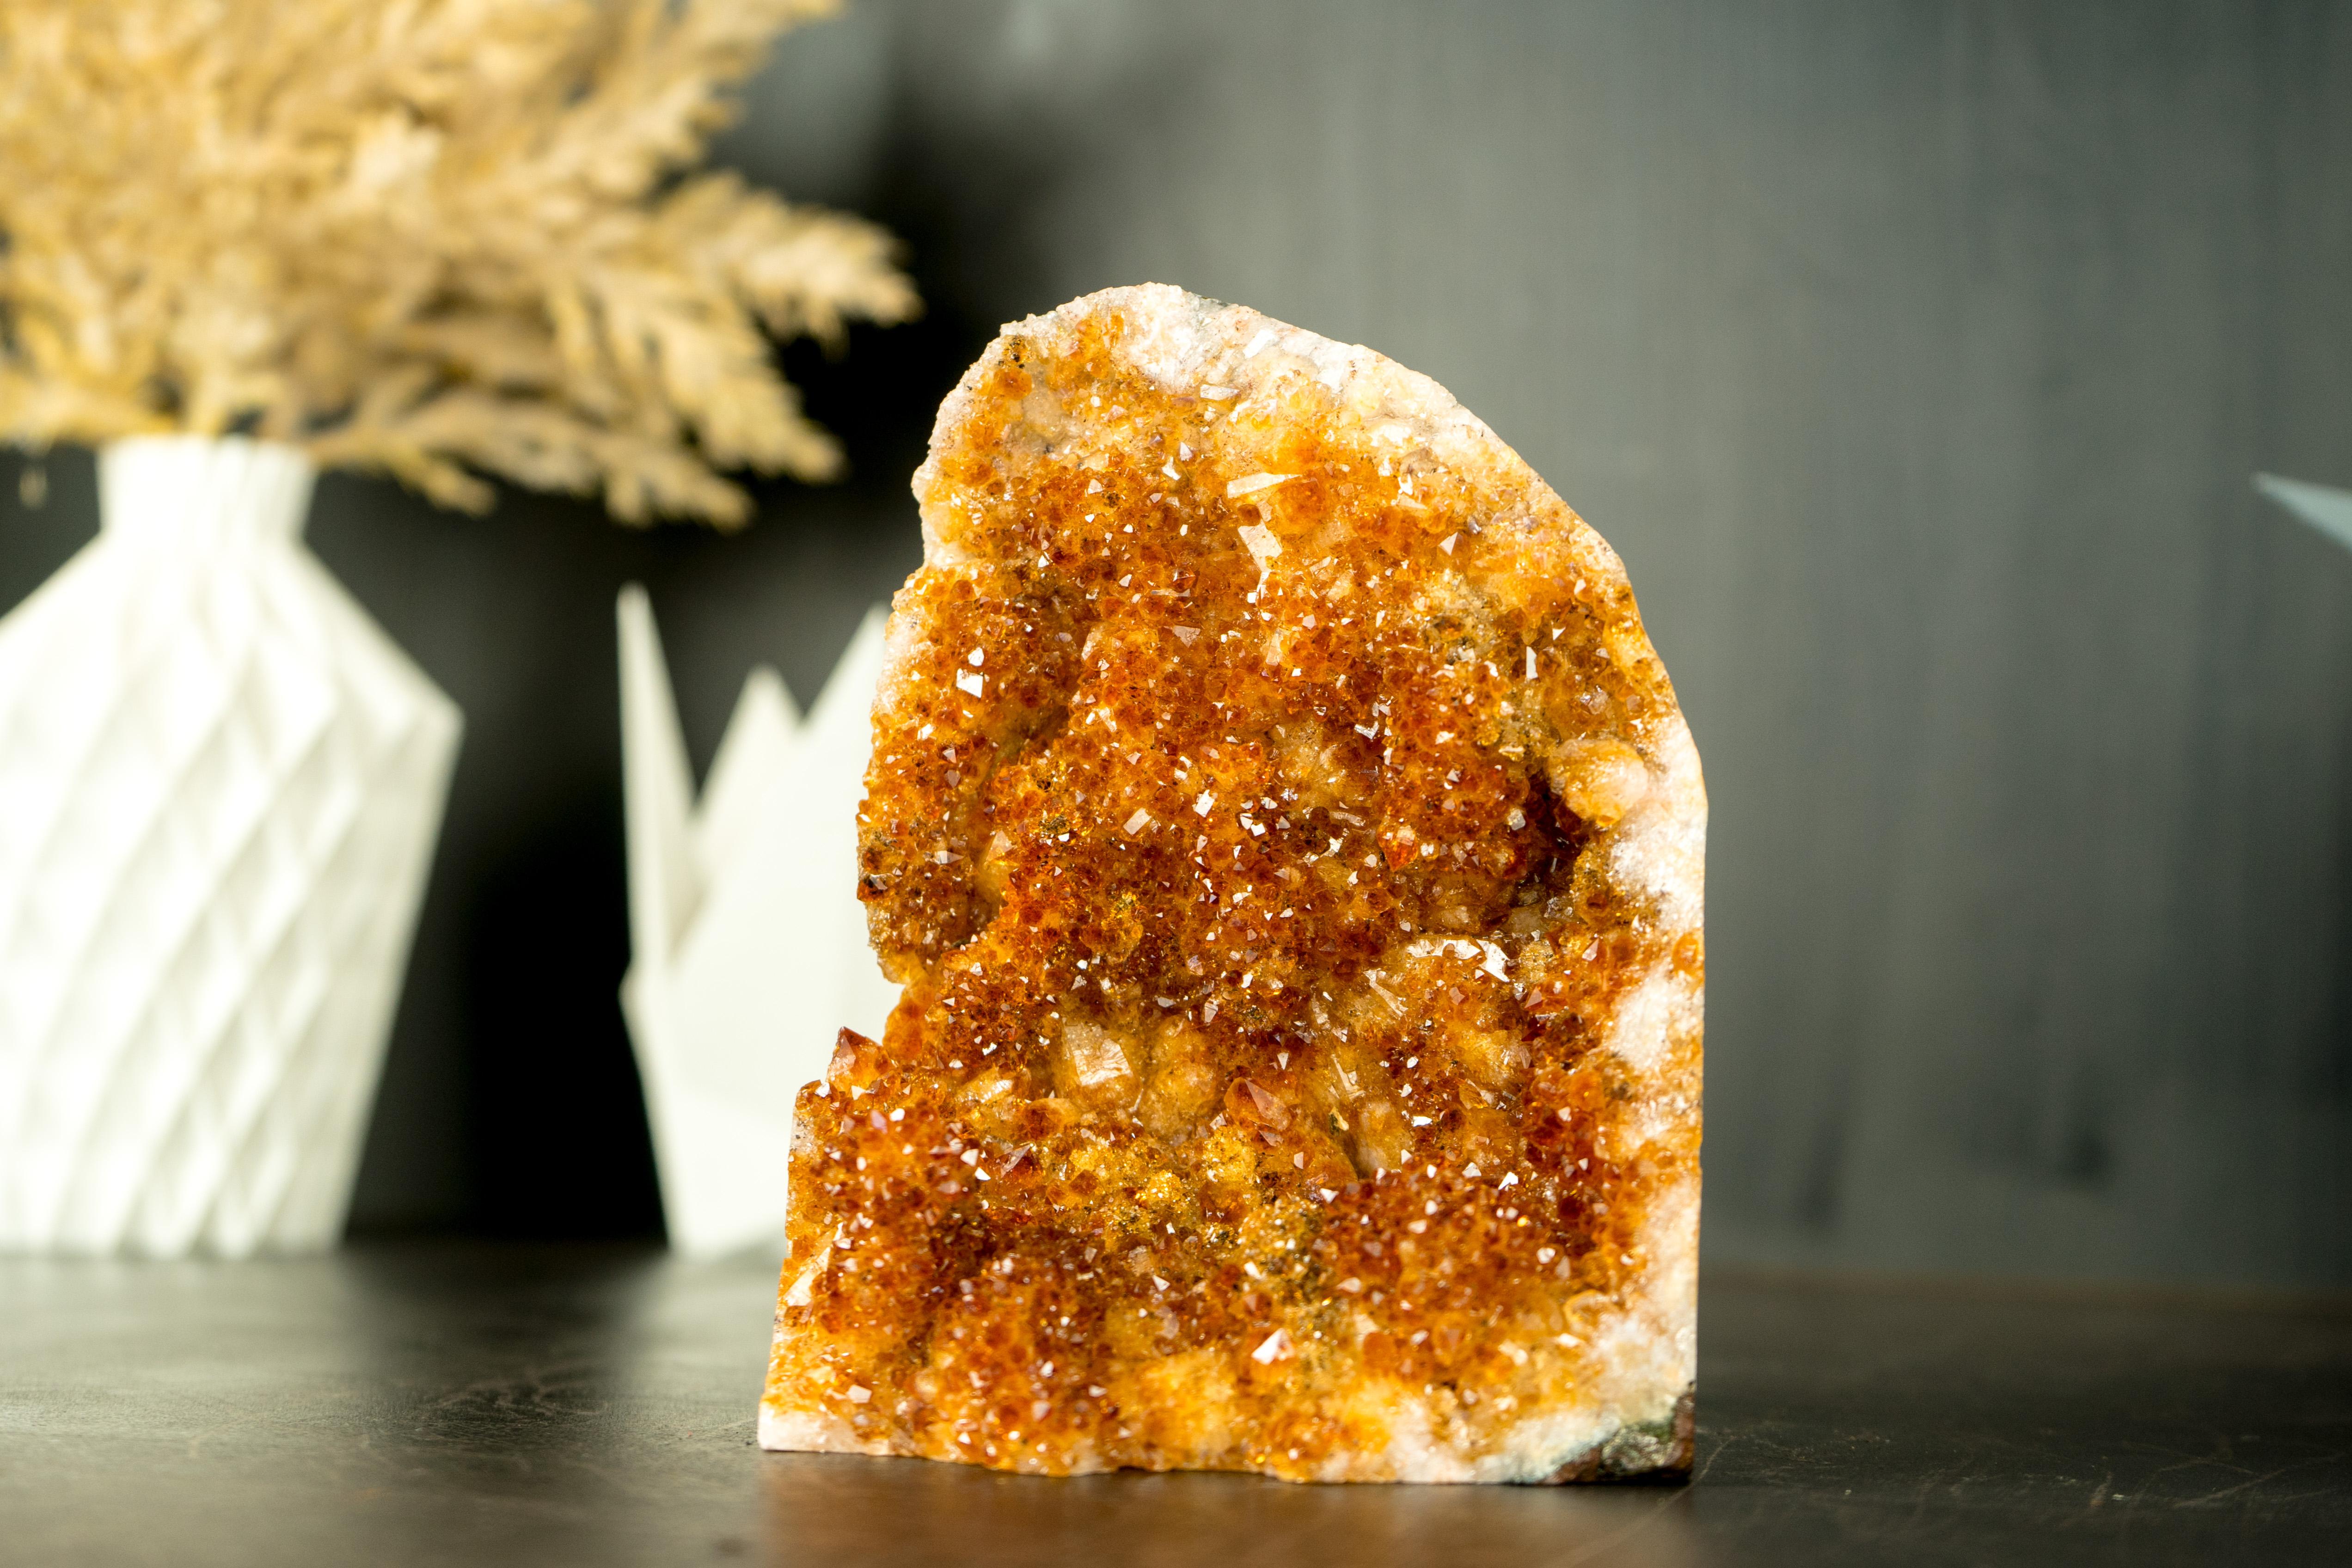 Citrine Cluster with Citrine Flower Stalactites, Galaxy Druzy and Deep Orange Madeira Citrine Druzy

▫️ Description

Small in size yet a magnificent Citrine specimen, this cluster presents a beautiful formation, rarity, and Citrine Flower